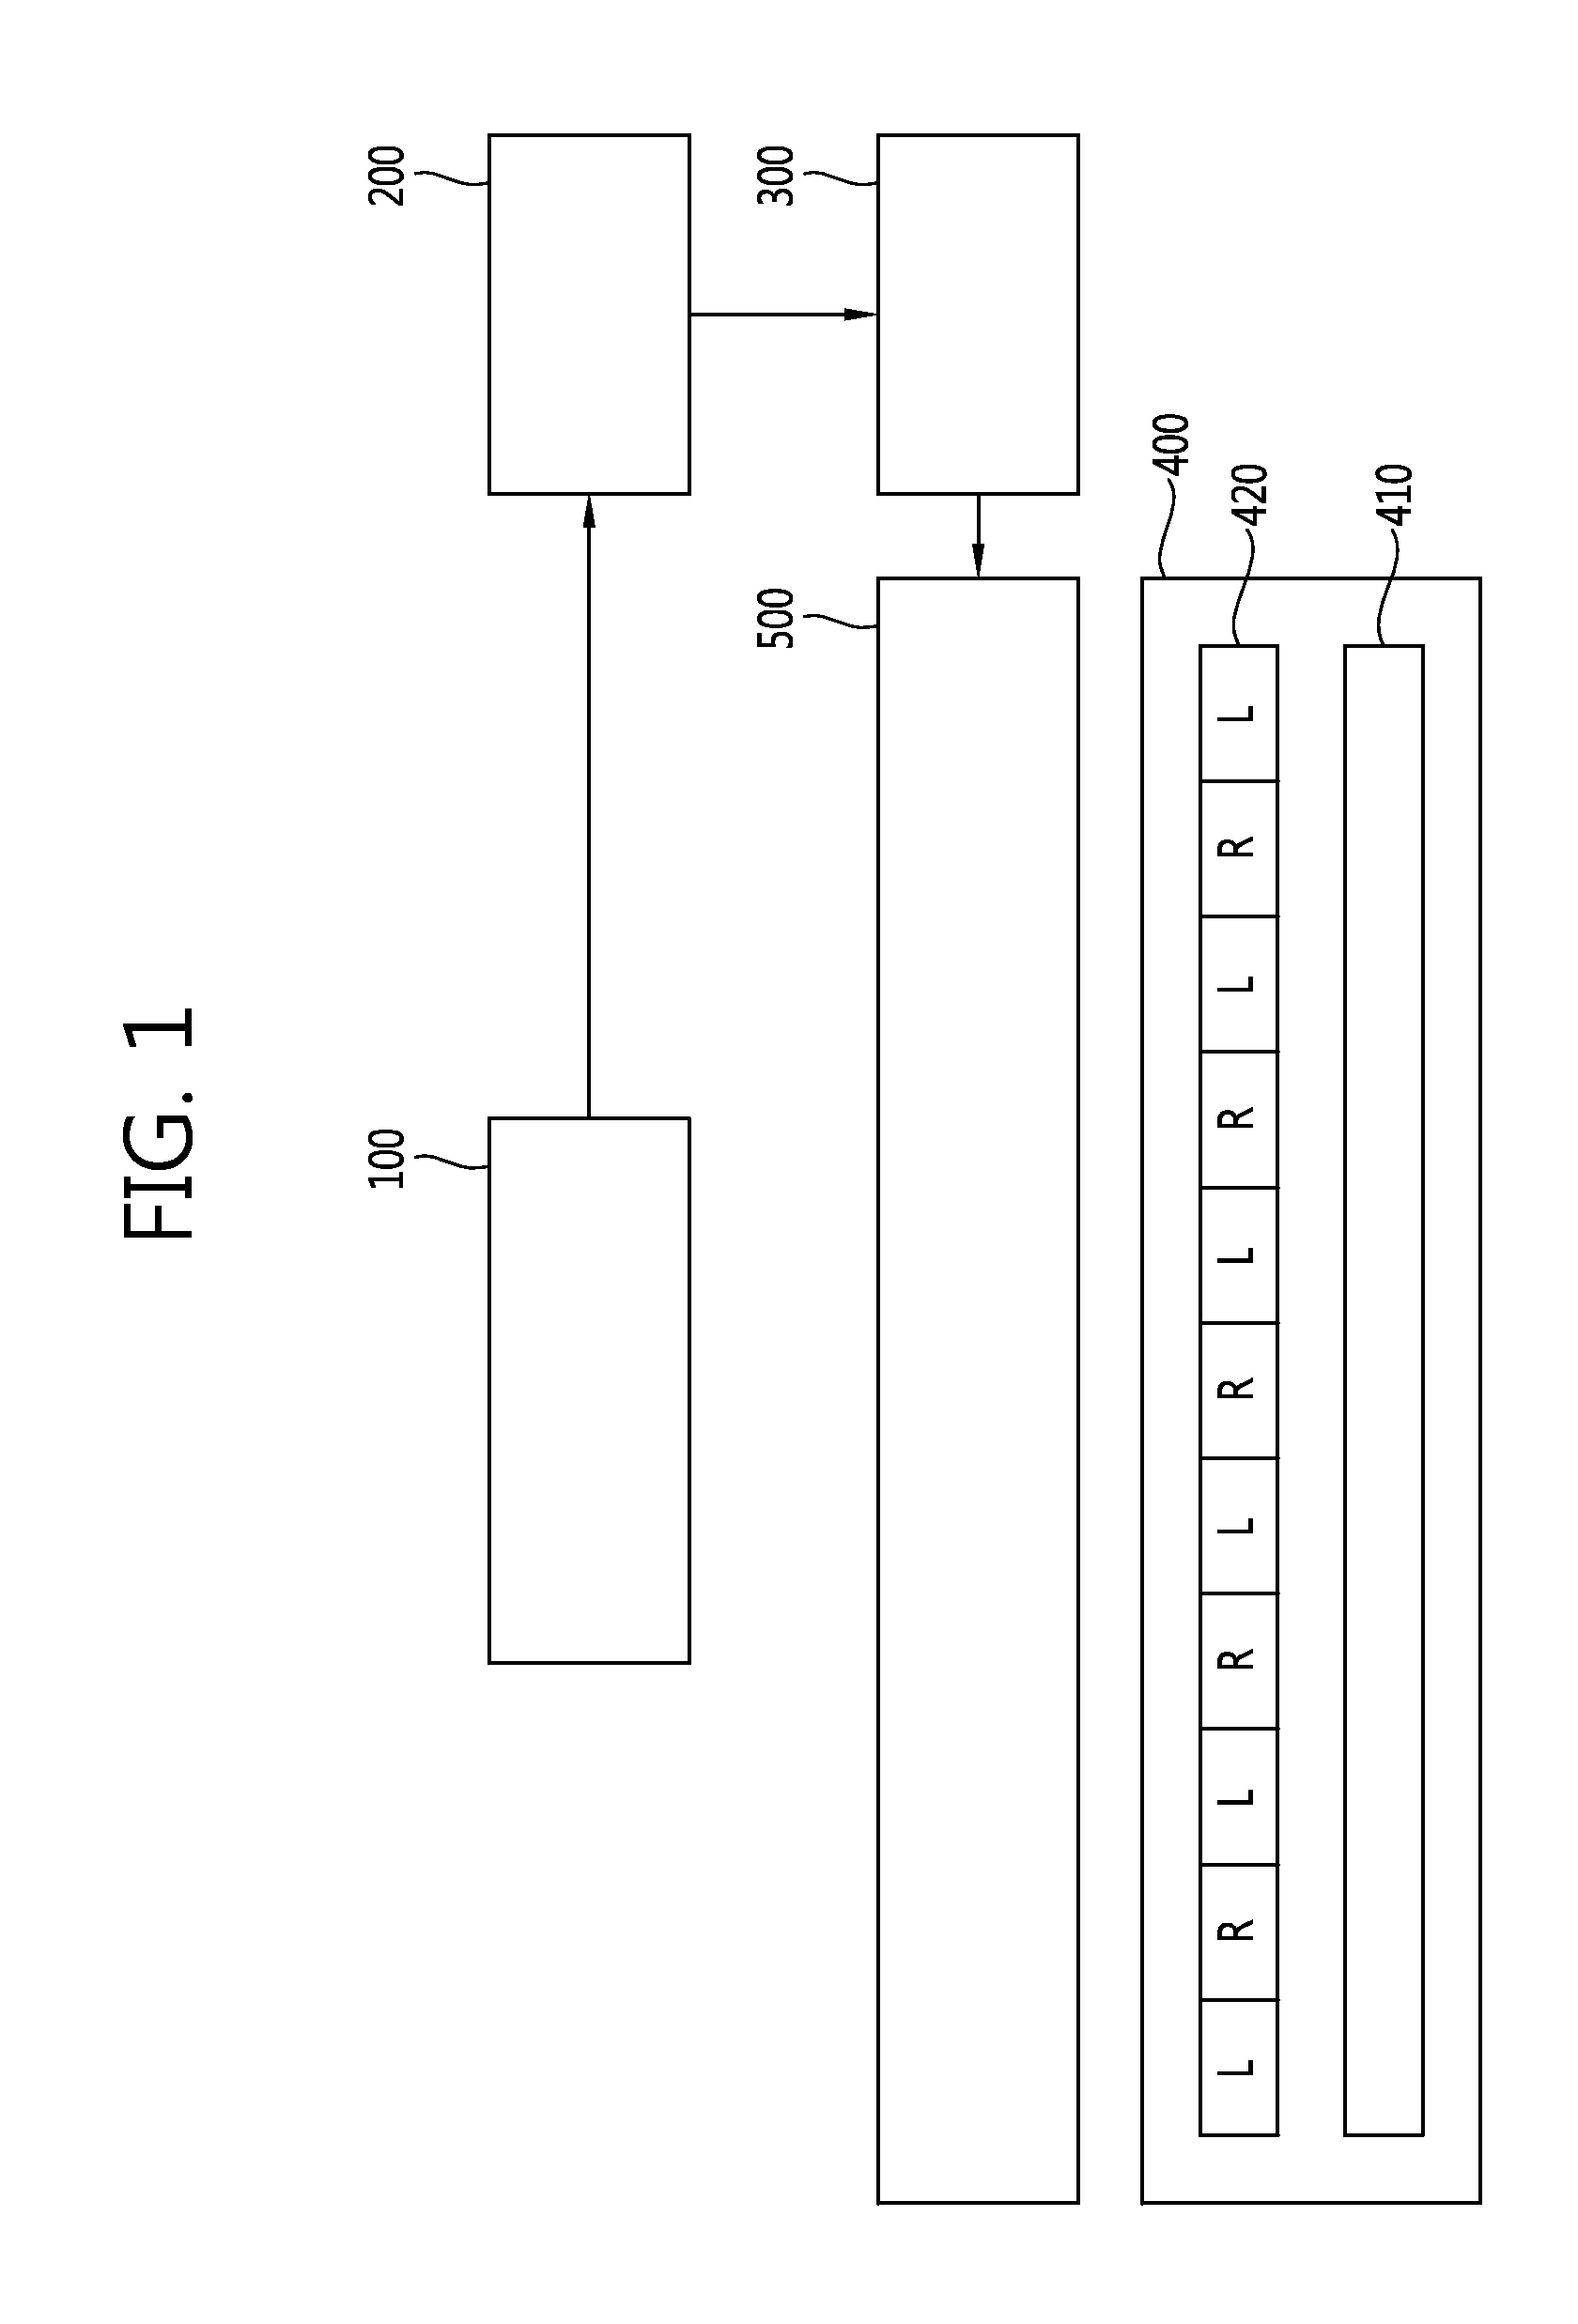 Stereo-scopic image panel, stereo-scopic image display apparatus having the same and driving method thereof